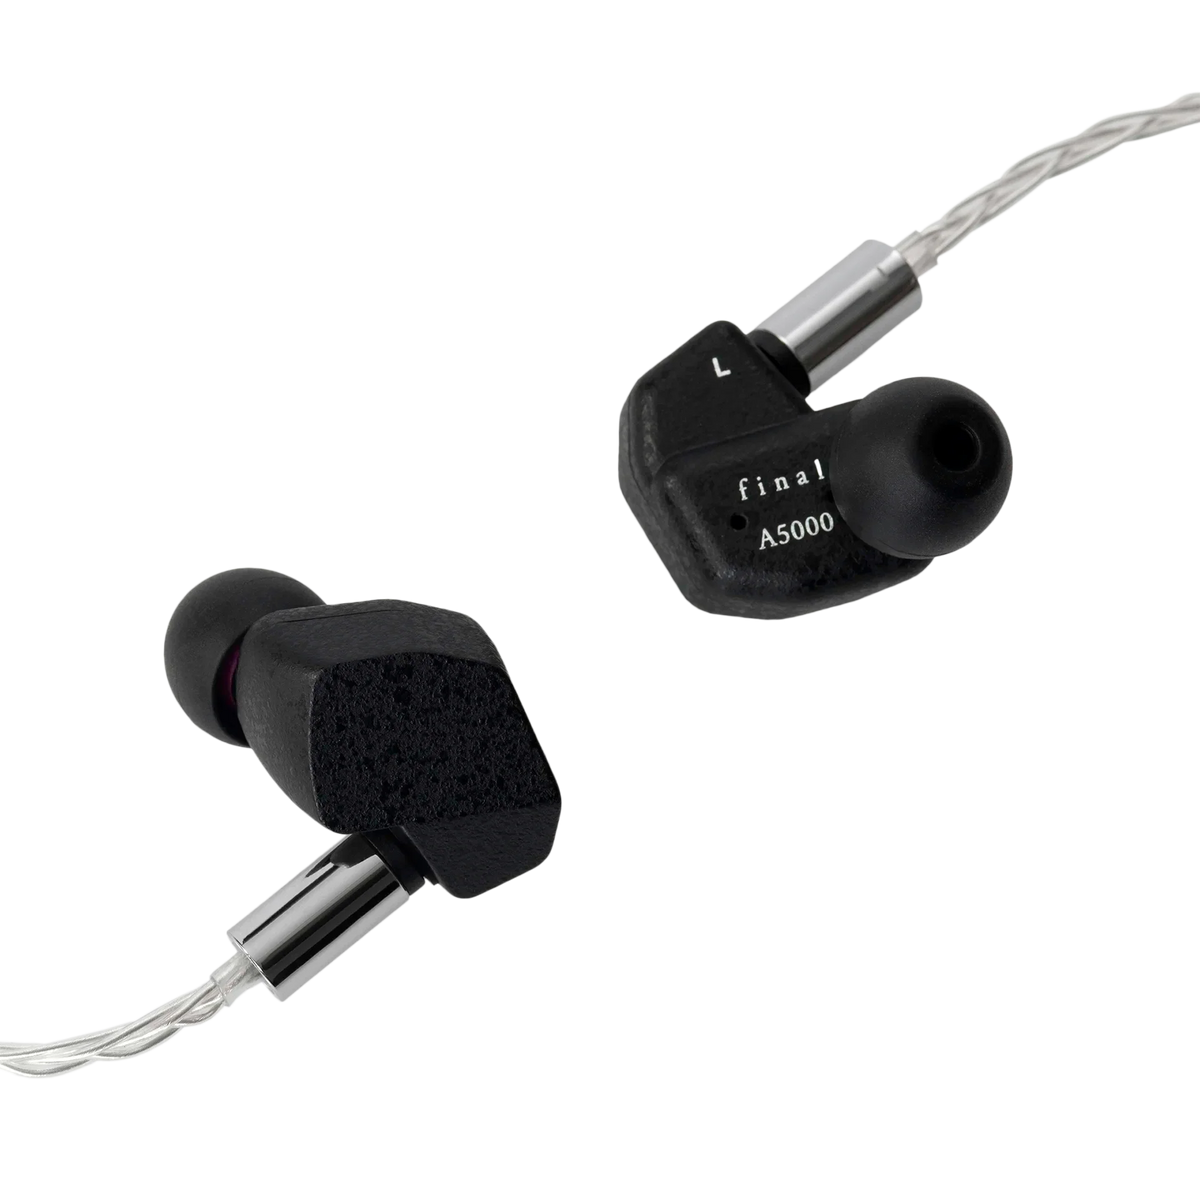 Final A5000 - Single Driver IEM Earphones With Detachable Cable - Refurbished